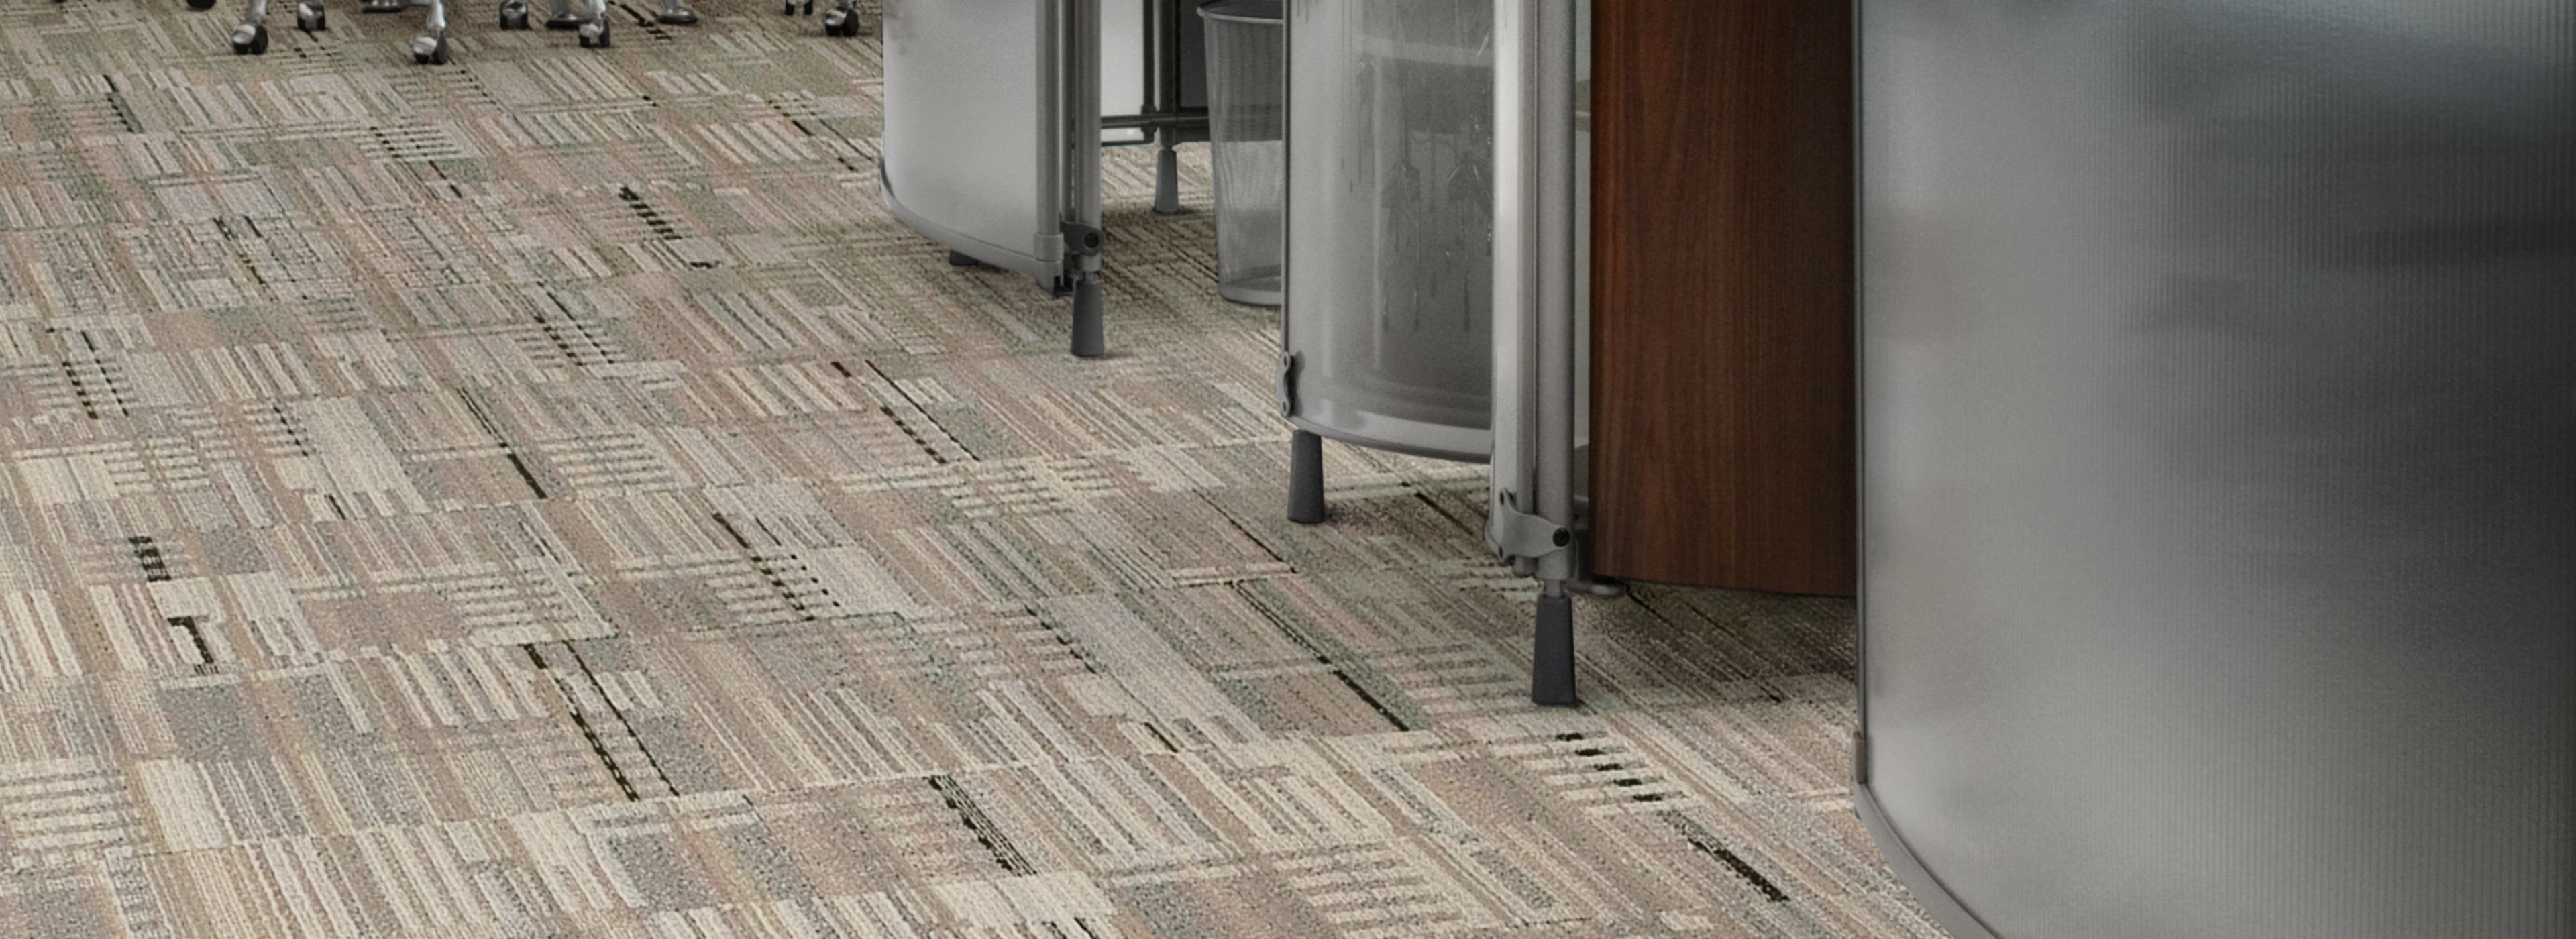 Interface Remade carpet tile in open hallway with seating area in background image number 1